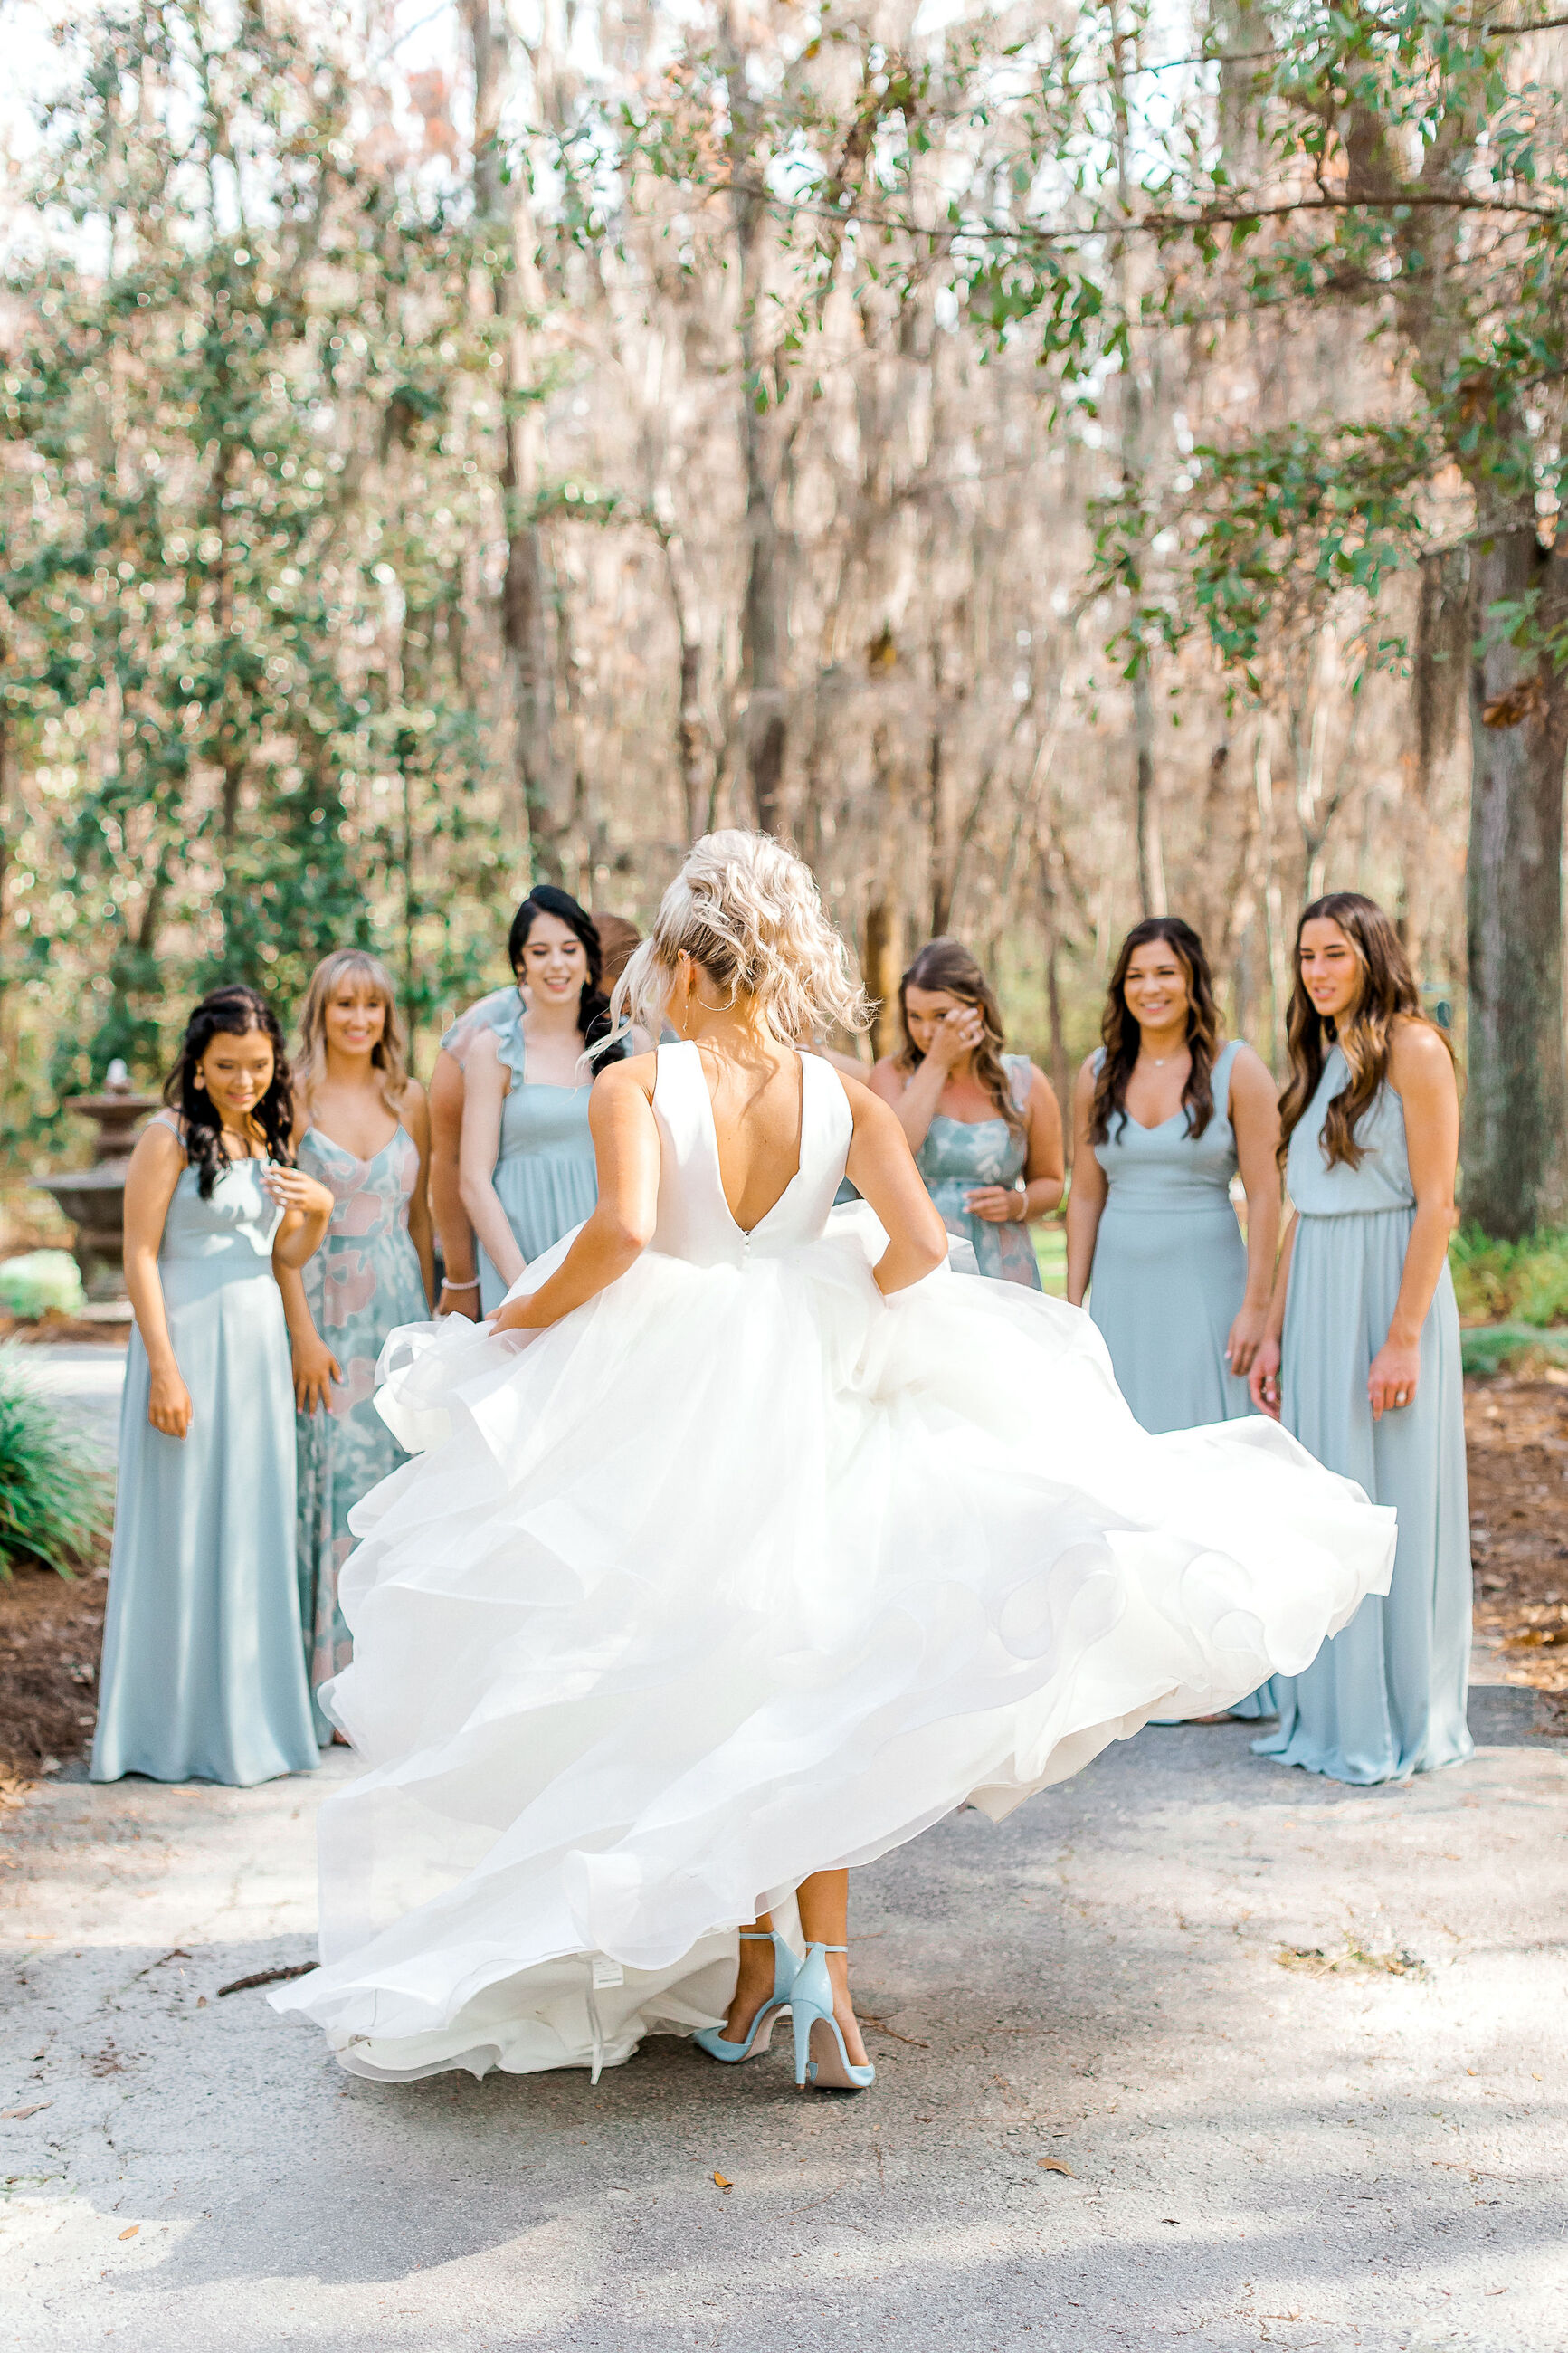 spinning in ball gown wedding dress